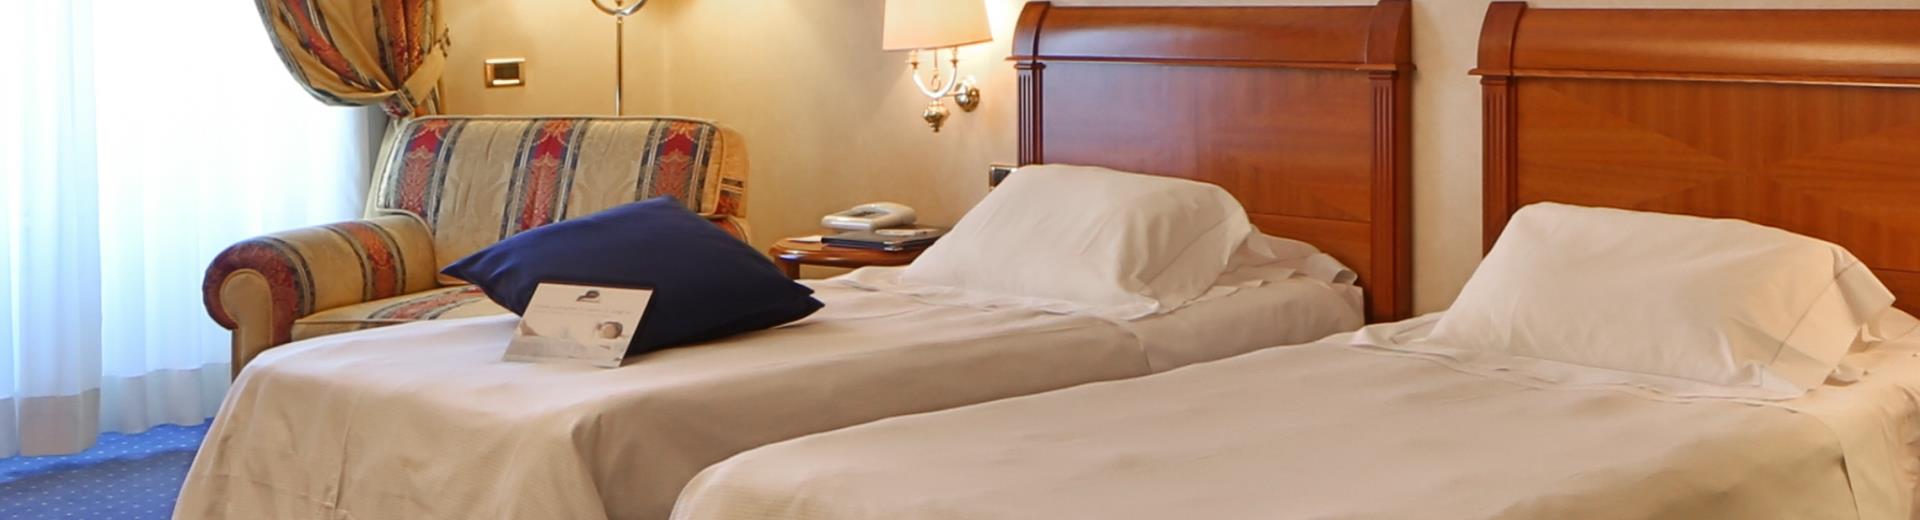 Choose our hotel 4 stars for your family holidays in Bergamo city